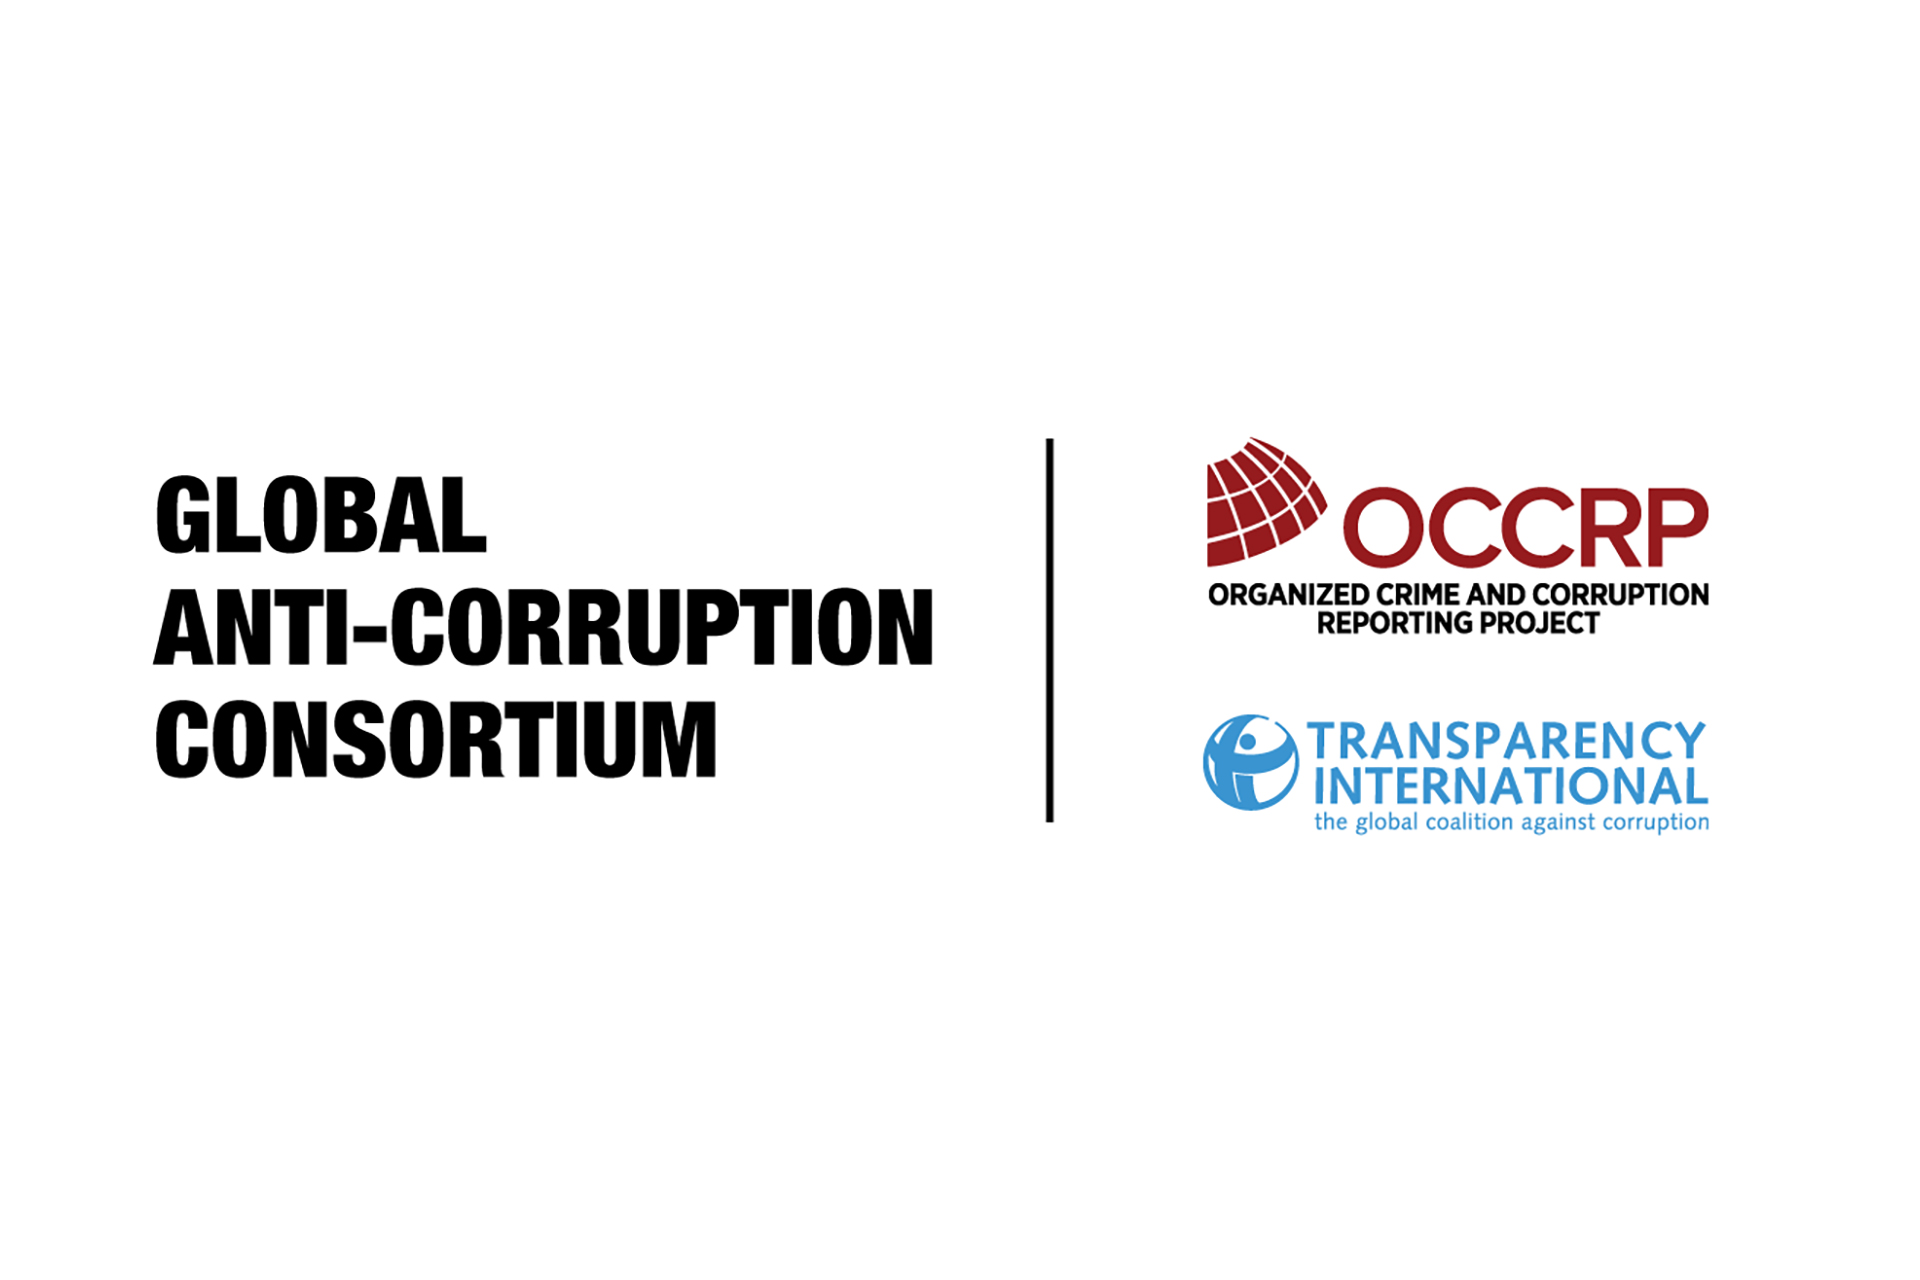 U.S. Calls for Increased Support for OCCRP's Global Anti-Corruption Consortium